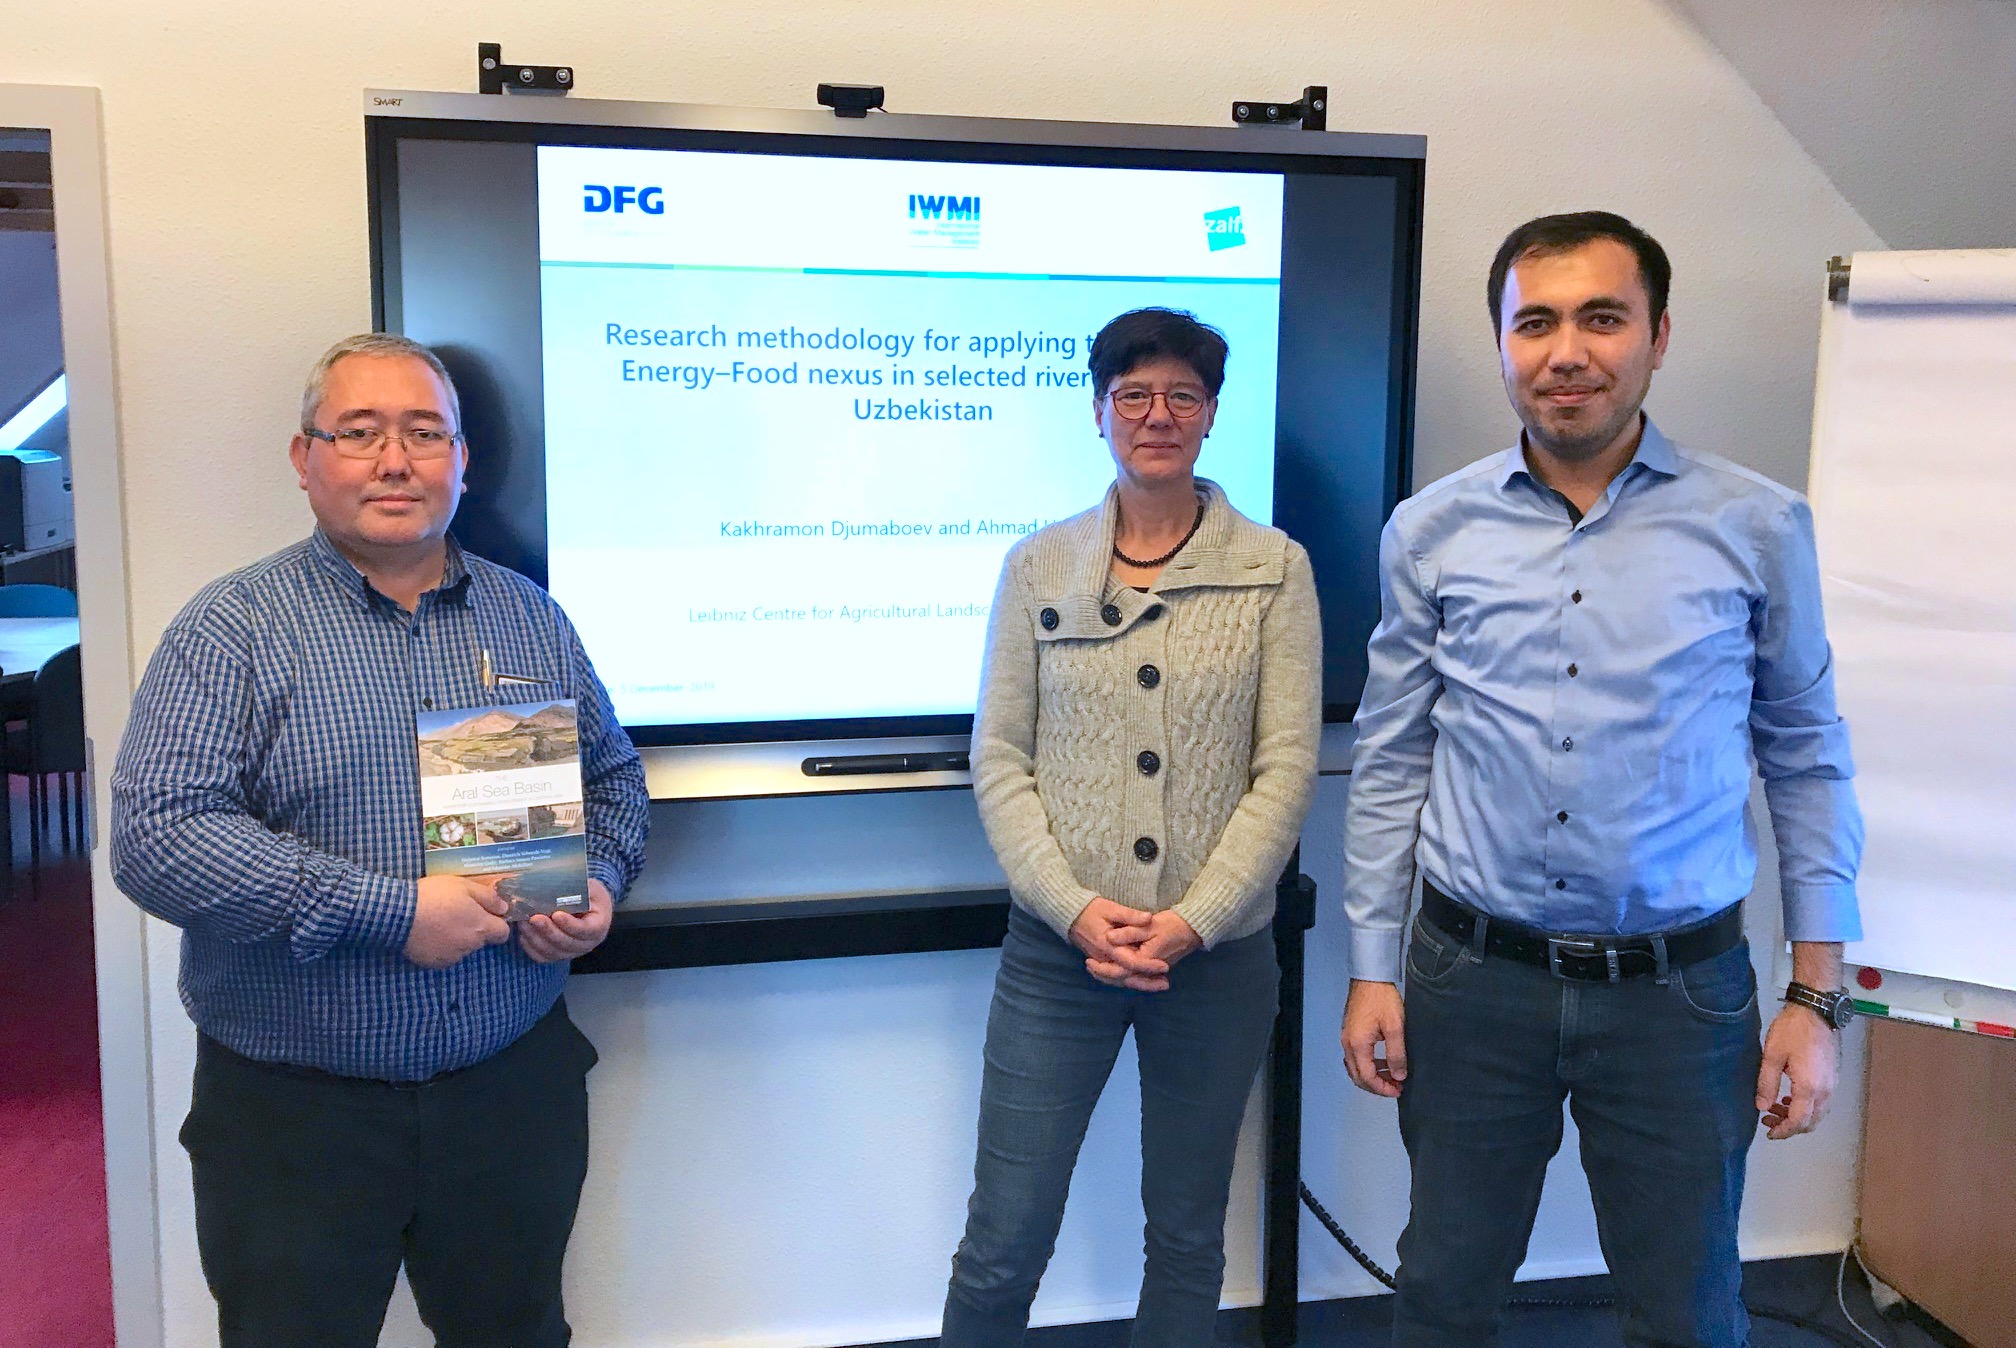 Kakhramon Djumaboev (first from left) during a guest researcher posting in November 2019 at the Leibniz Centre for Agricultural Landscape Research (ZALF) in Germany. Djumaboev was there to work with Dr. Ahmad Hamidov in the DFG-funded WEFUz project. Photo: ZALF.